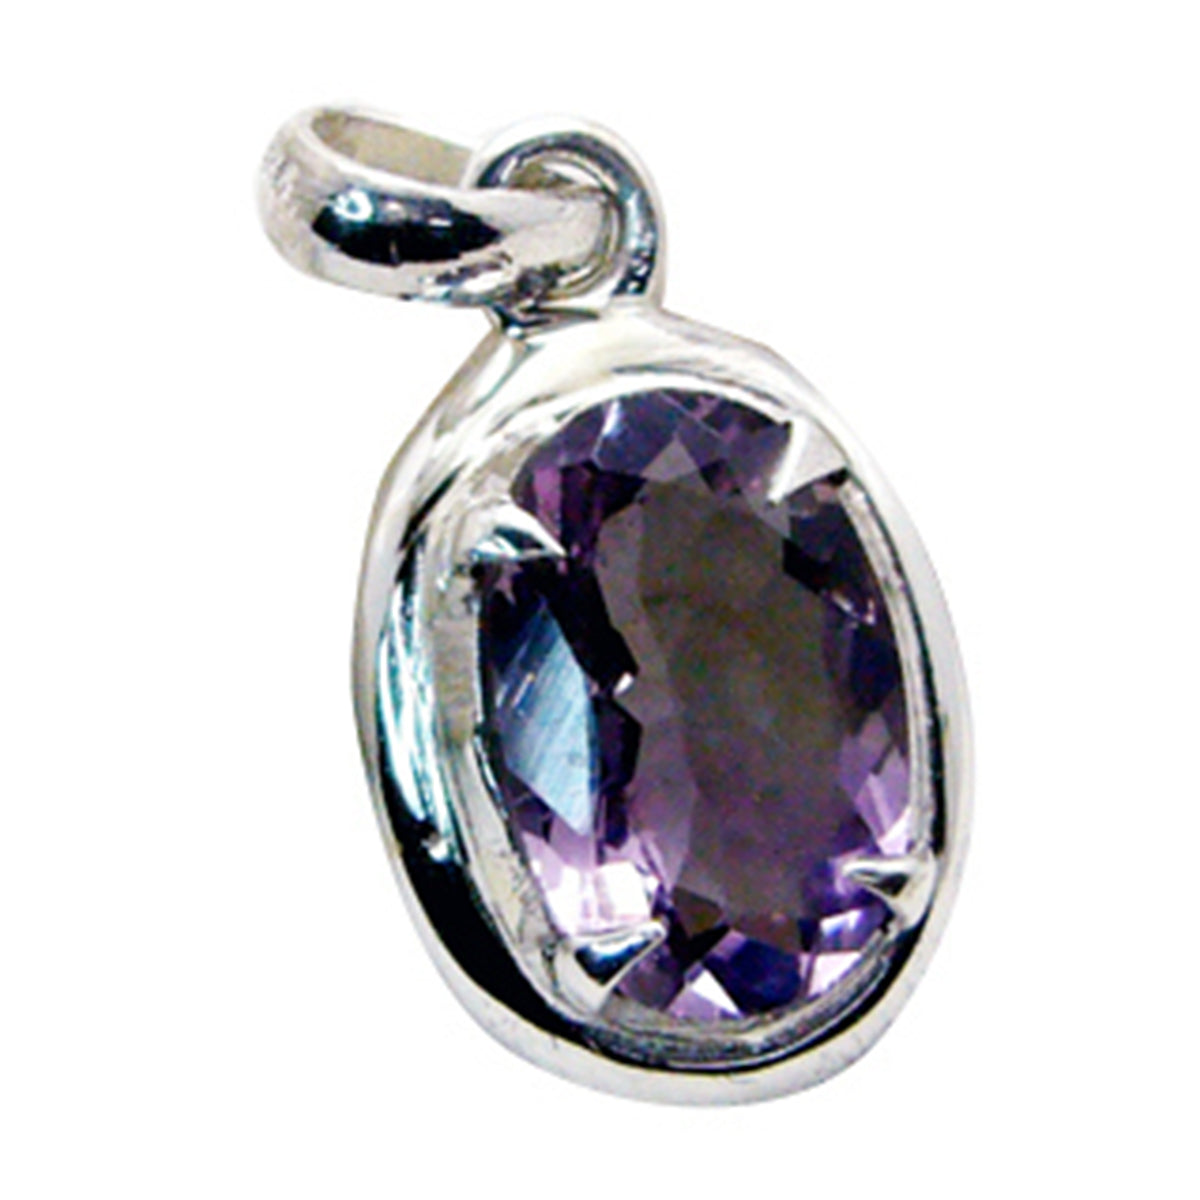 Riyo Genuine Gems Oval Faceted Purple Amethyst Solid Silver Pendants gift for children day